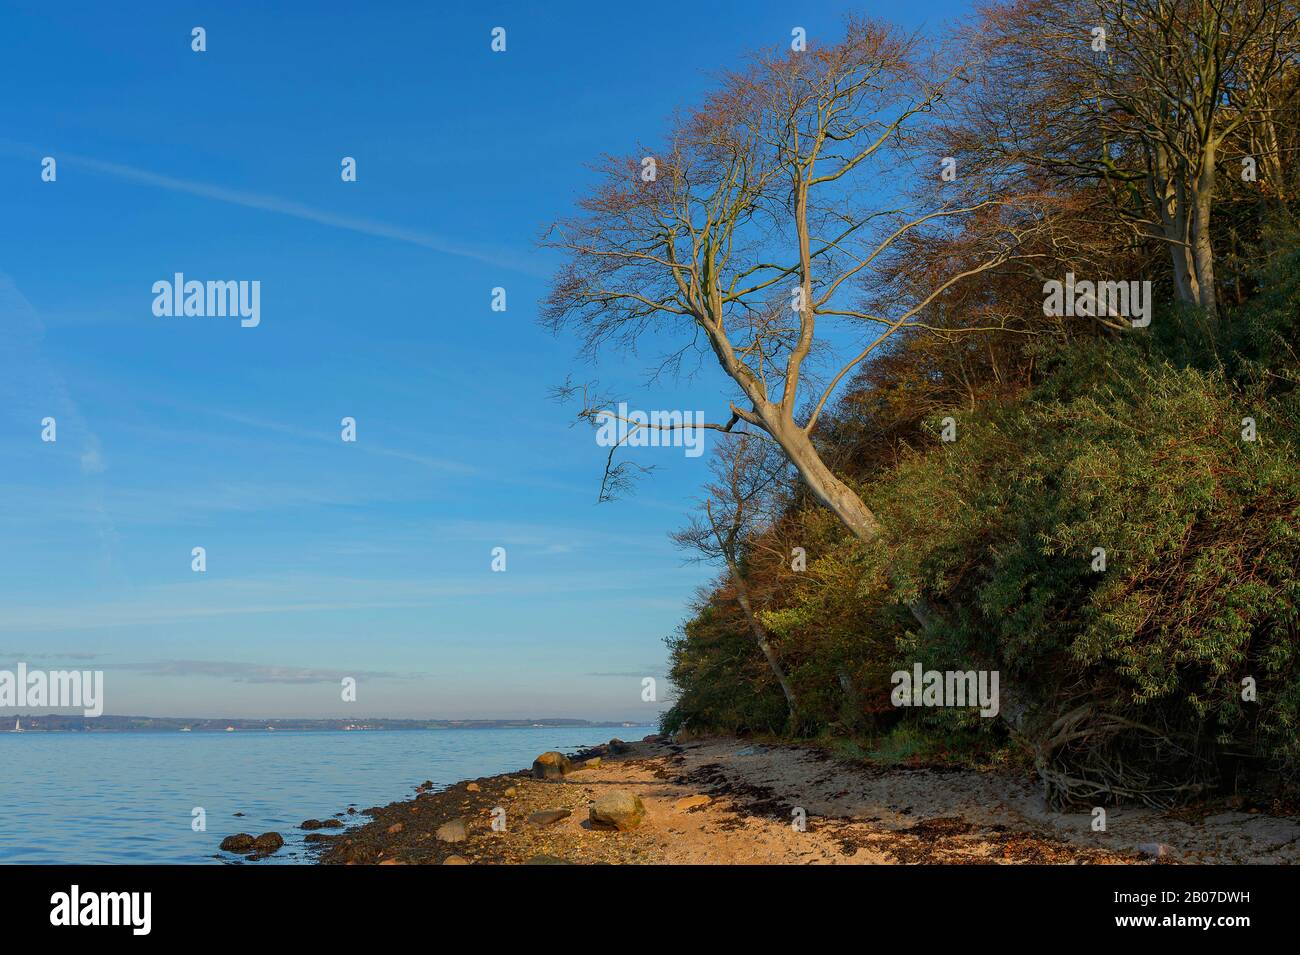 shingle beach and wooded shore of the Firth of Flensburg, Germany, Schleswig-Holstein Stock Photo